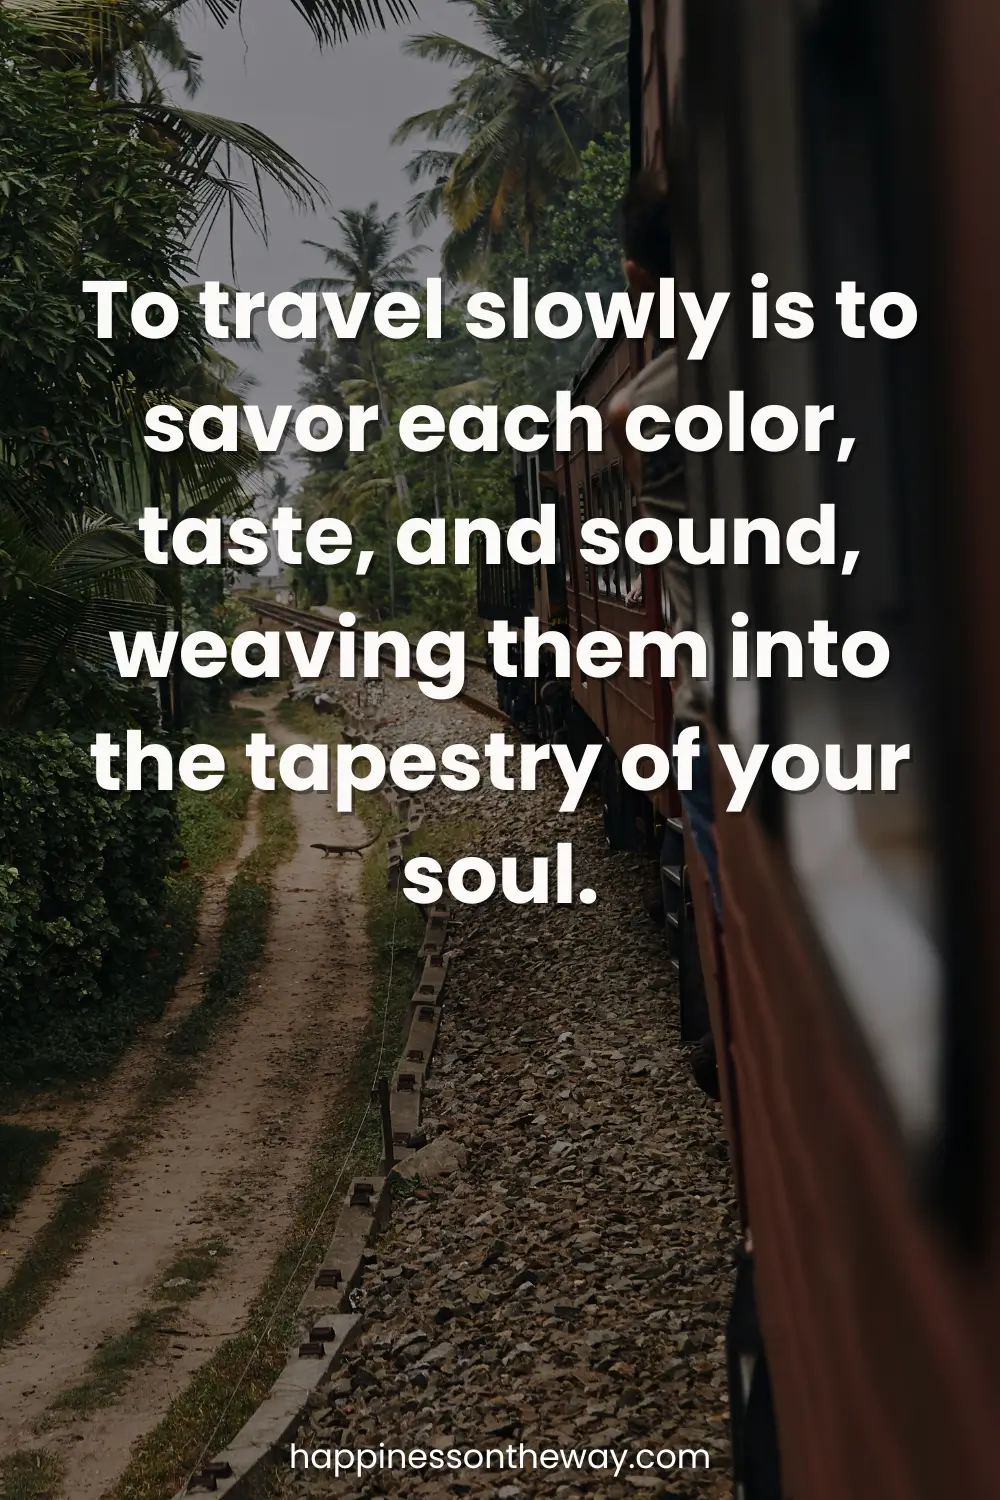 View from a train window showing lush greenery and a dirt path beside the railway track, with a quote 'To travel slowly is to savor each color, taste, and sound, weaving them into the tapestry of your soul.'